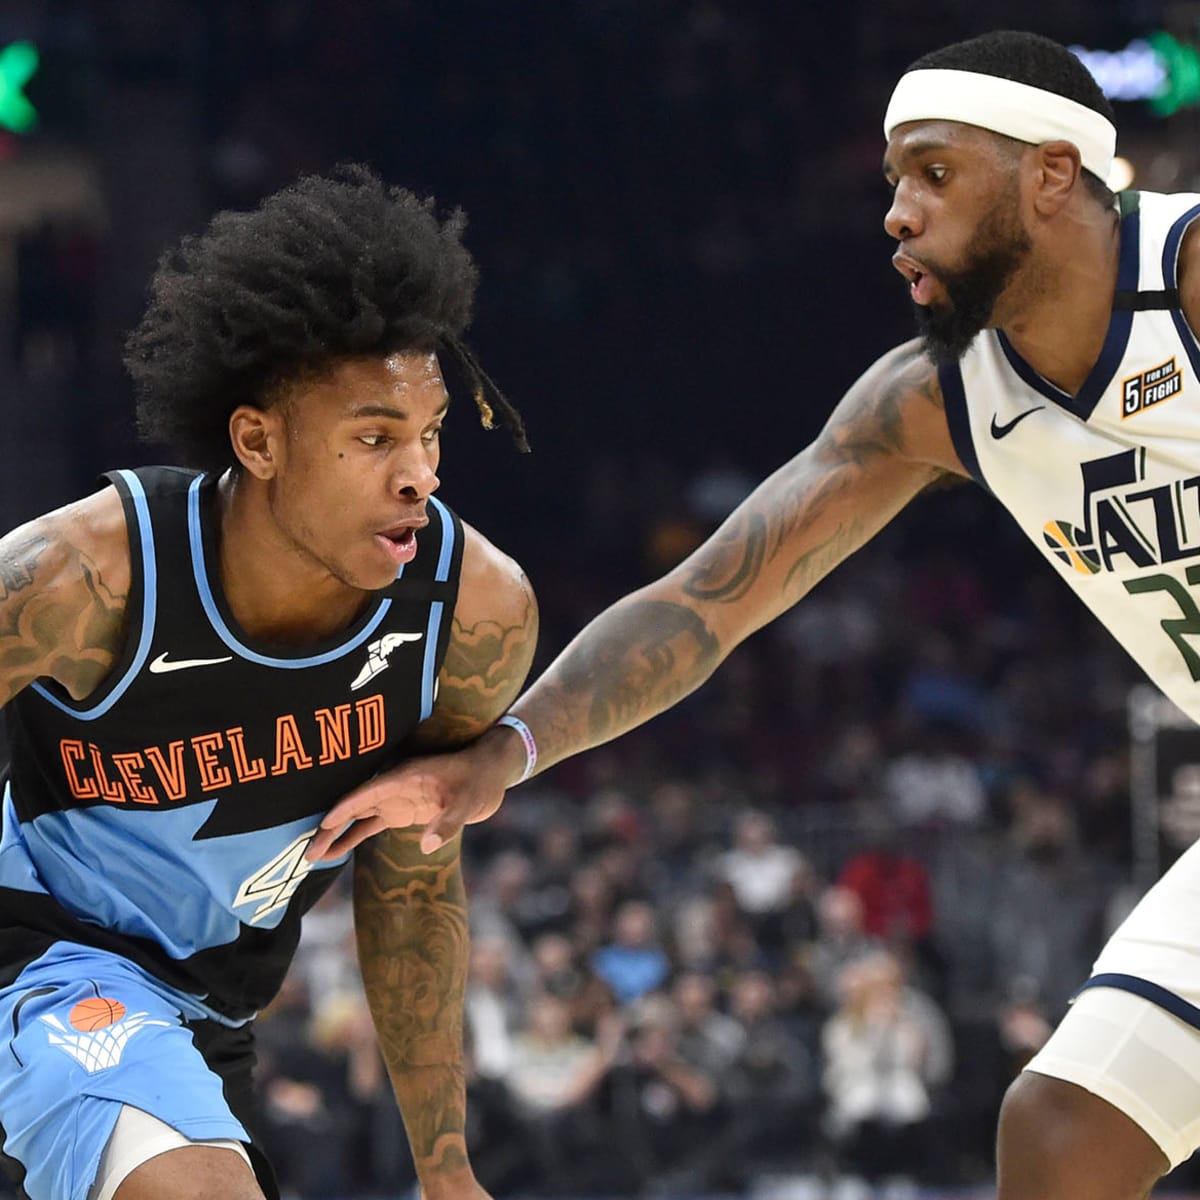 Cavs guard Kevin Porter Jr. arrested on weapons charge